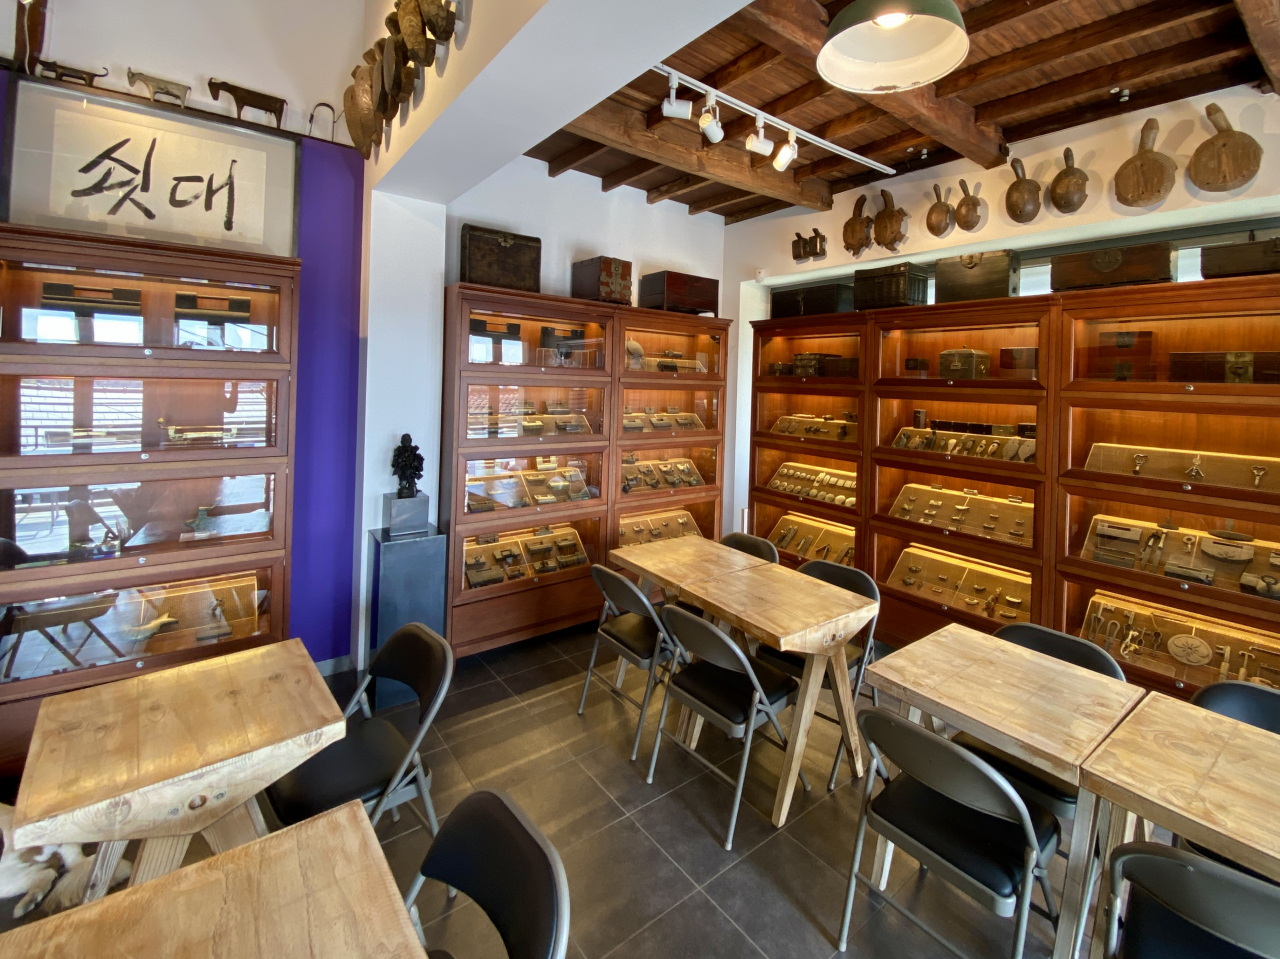 Rod locks and woodworks are displayed at Cafe Gaeppul in Jongno-gu, Seoul (Hwang Joo-young/The Korea Herald)